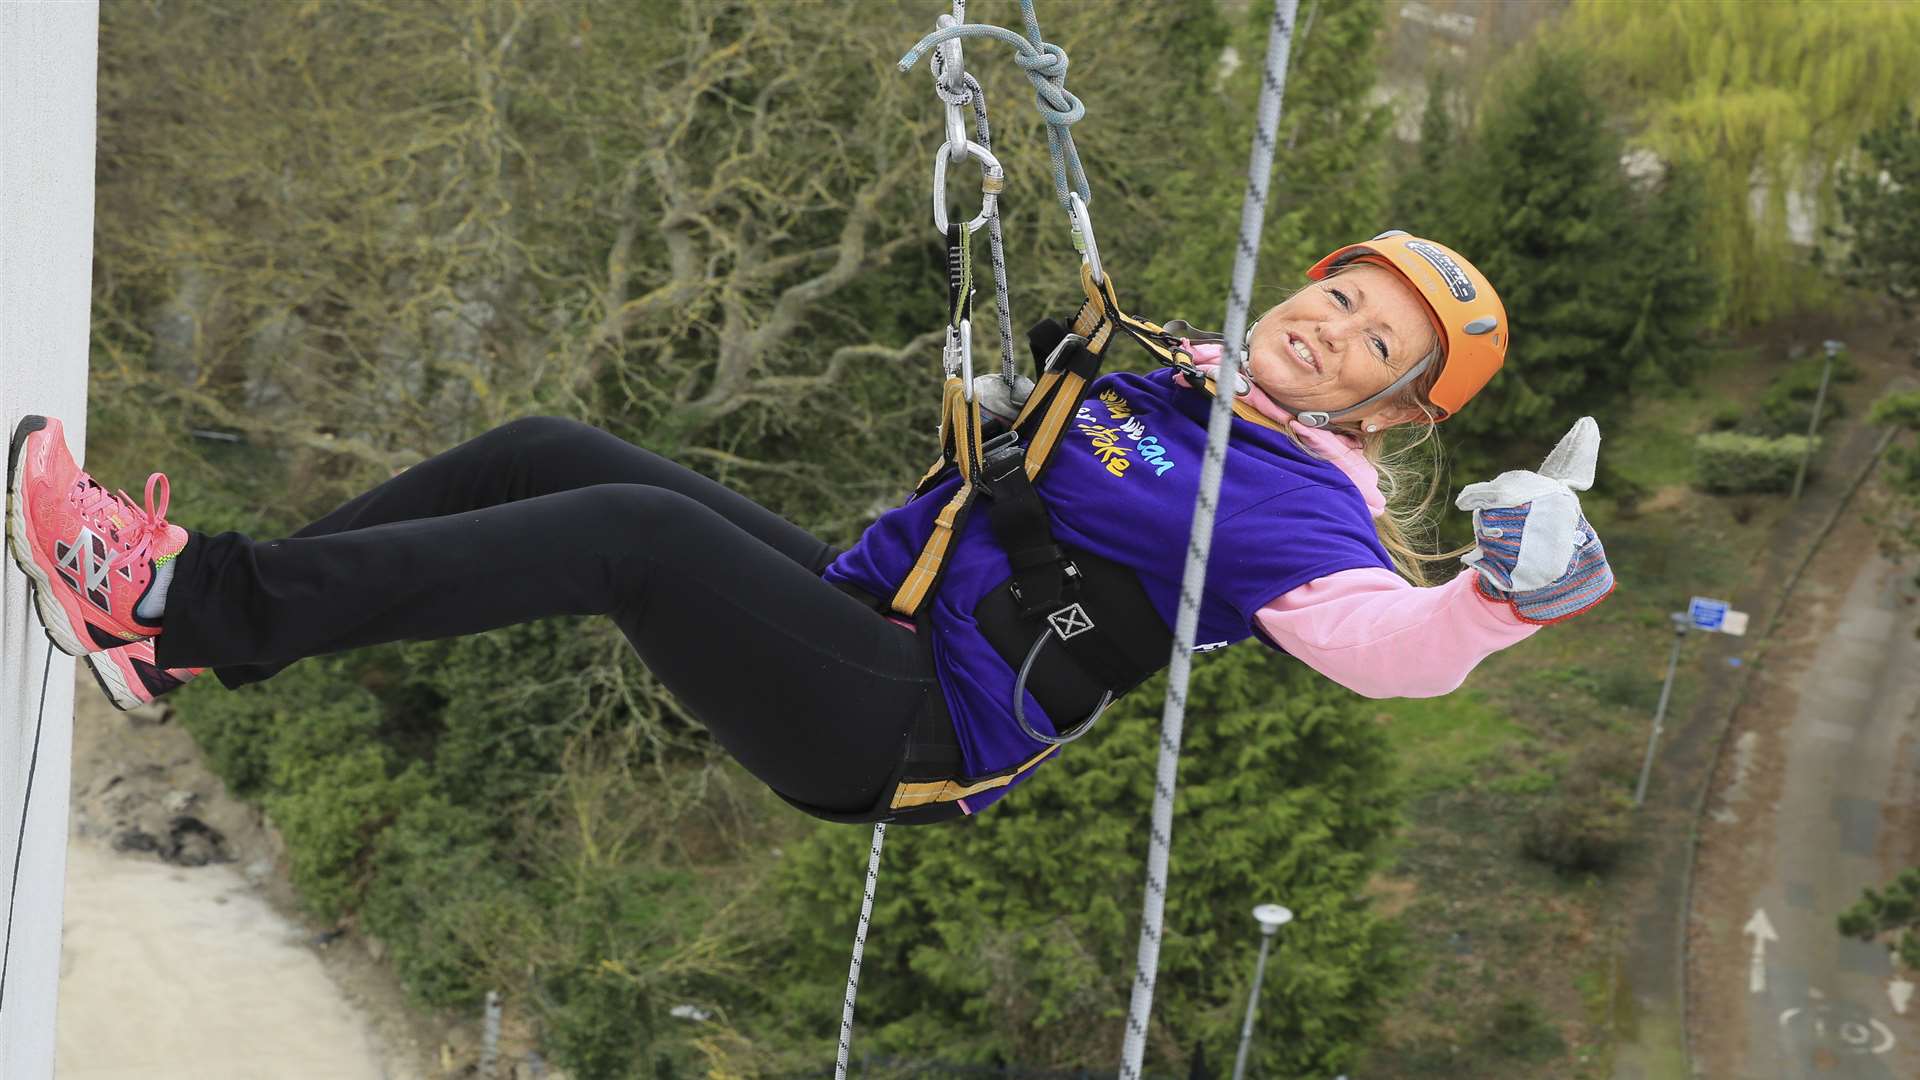 Tina Syers from Maidstone took part in last year's abseil in aid of the Stroke Association.